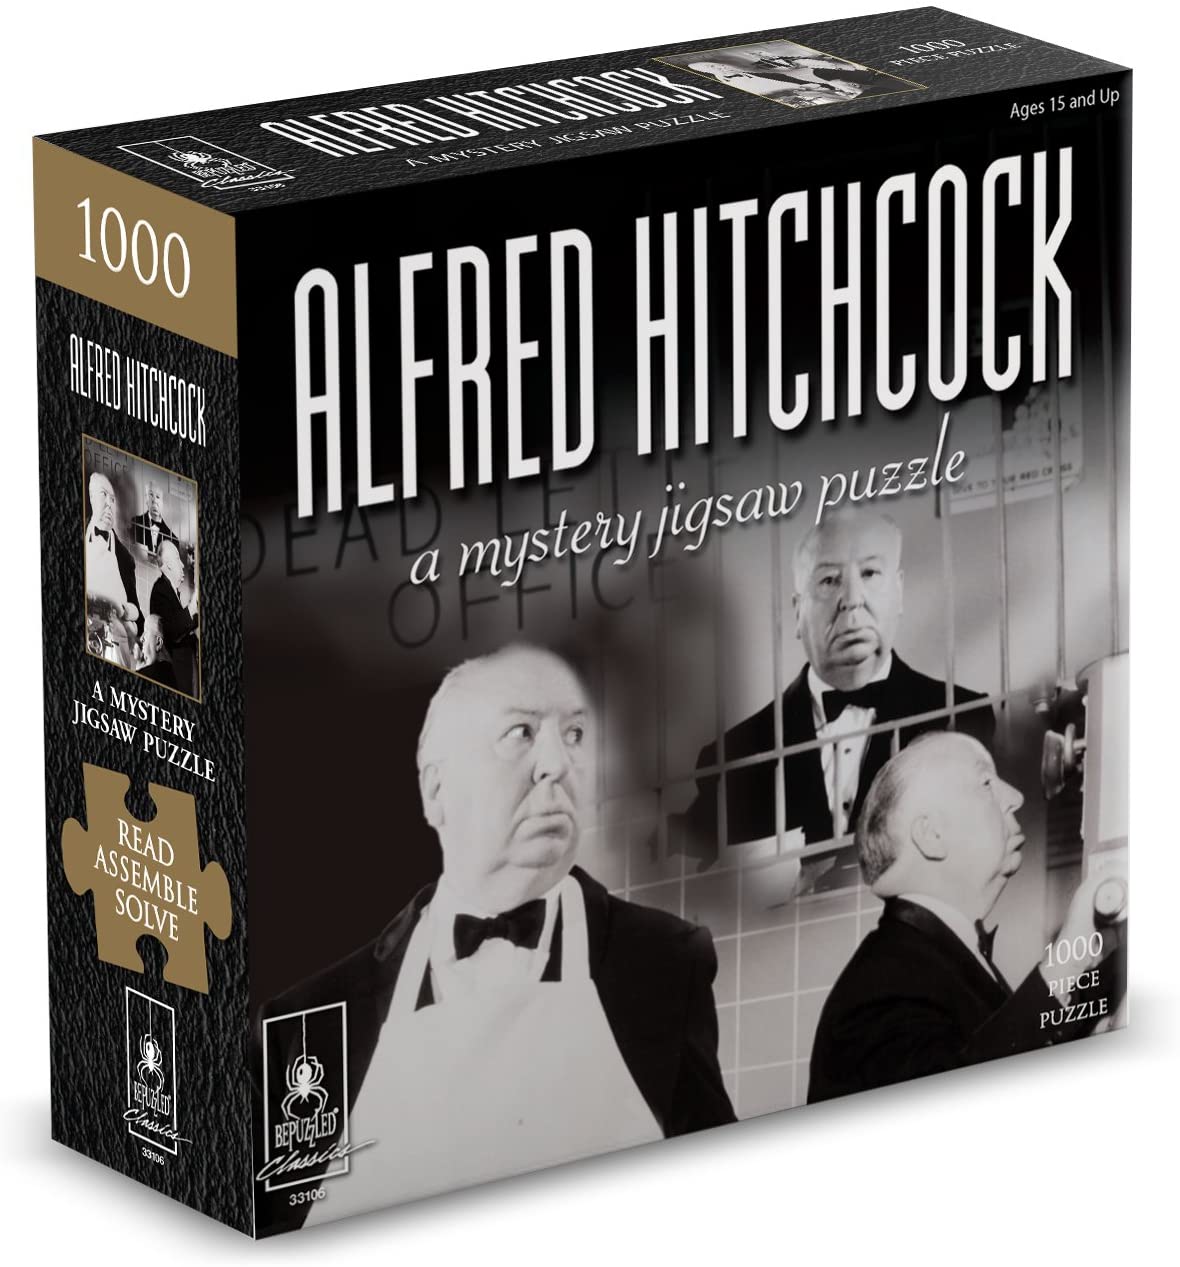 Alfred Hitchcock: A Mystery (1000 pc puzzle)